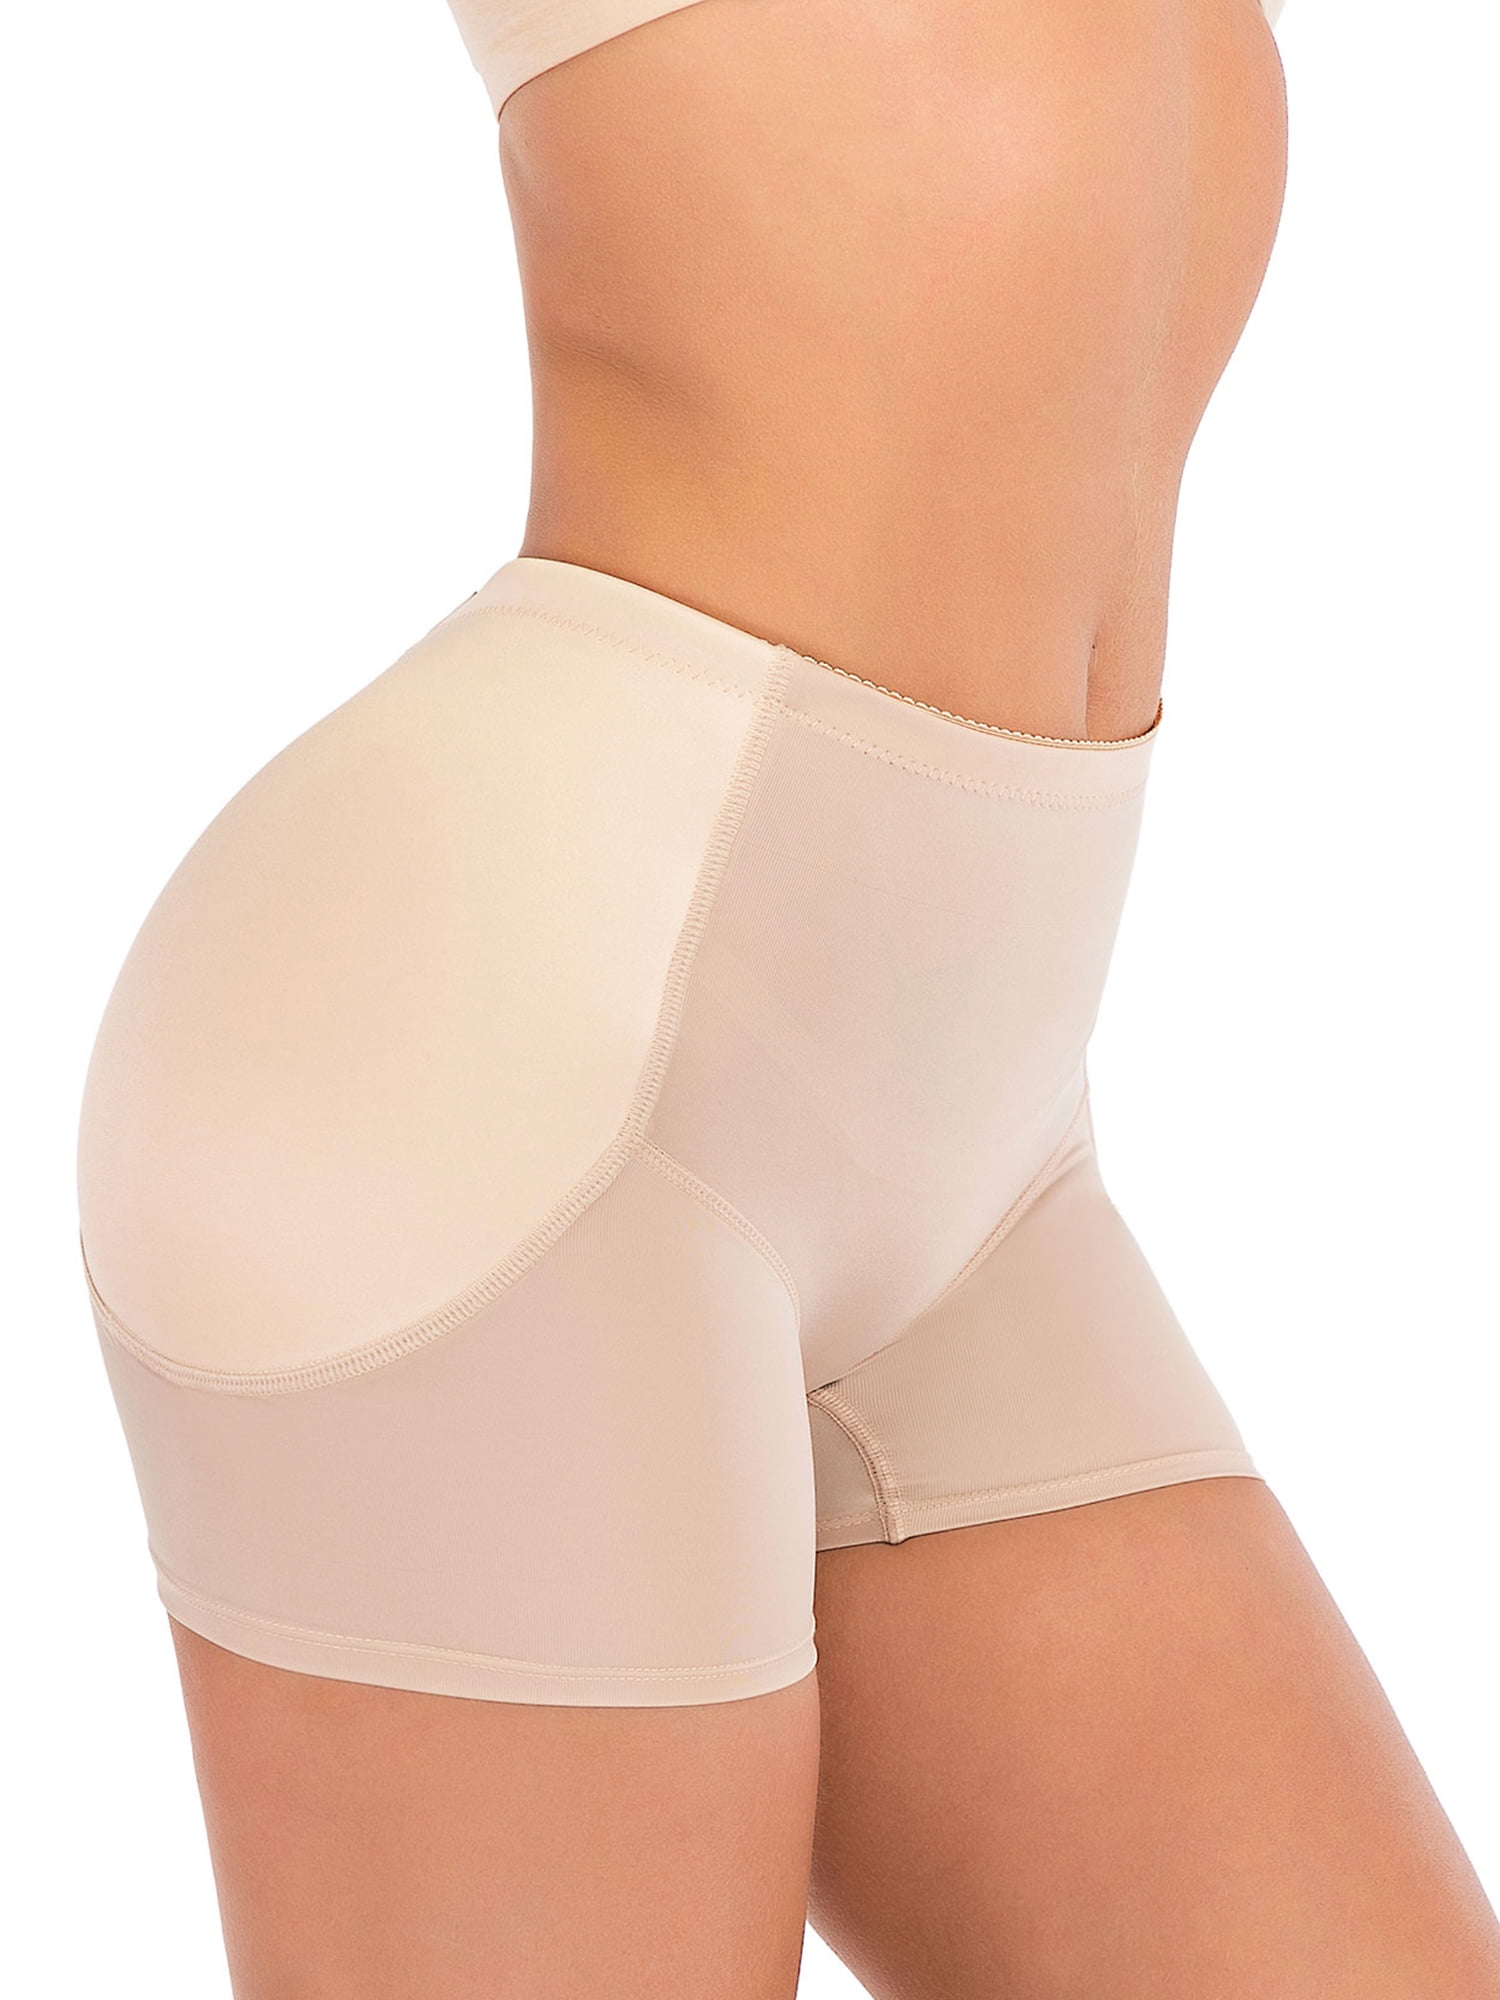 Luxtrada Sexy Padded Butt Lifter Panty Body Shaper Fake Hip